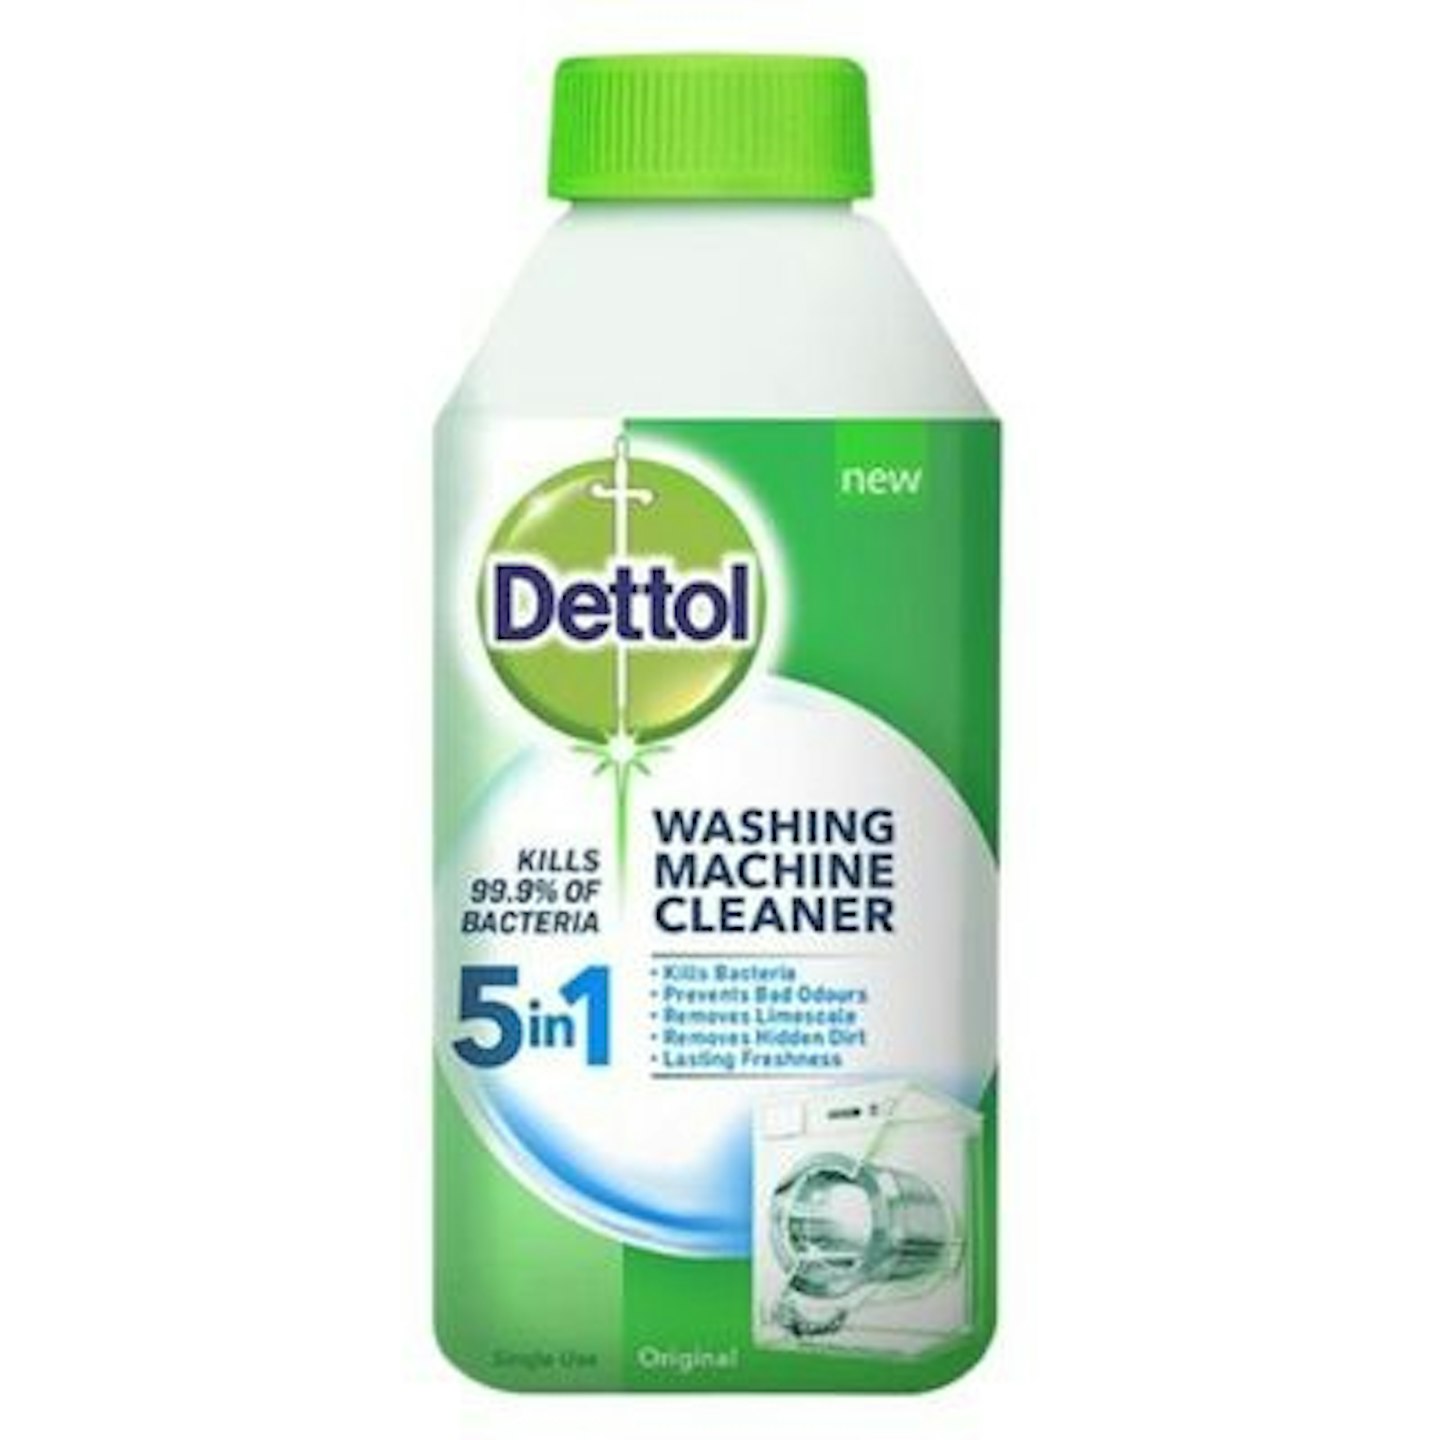 Dettol Anti Bacterial Washing Machine Cleaner